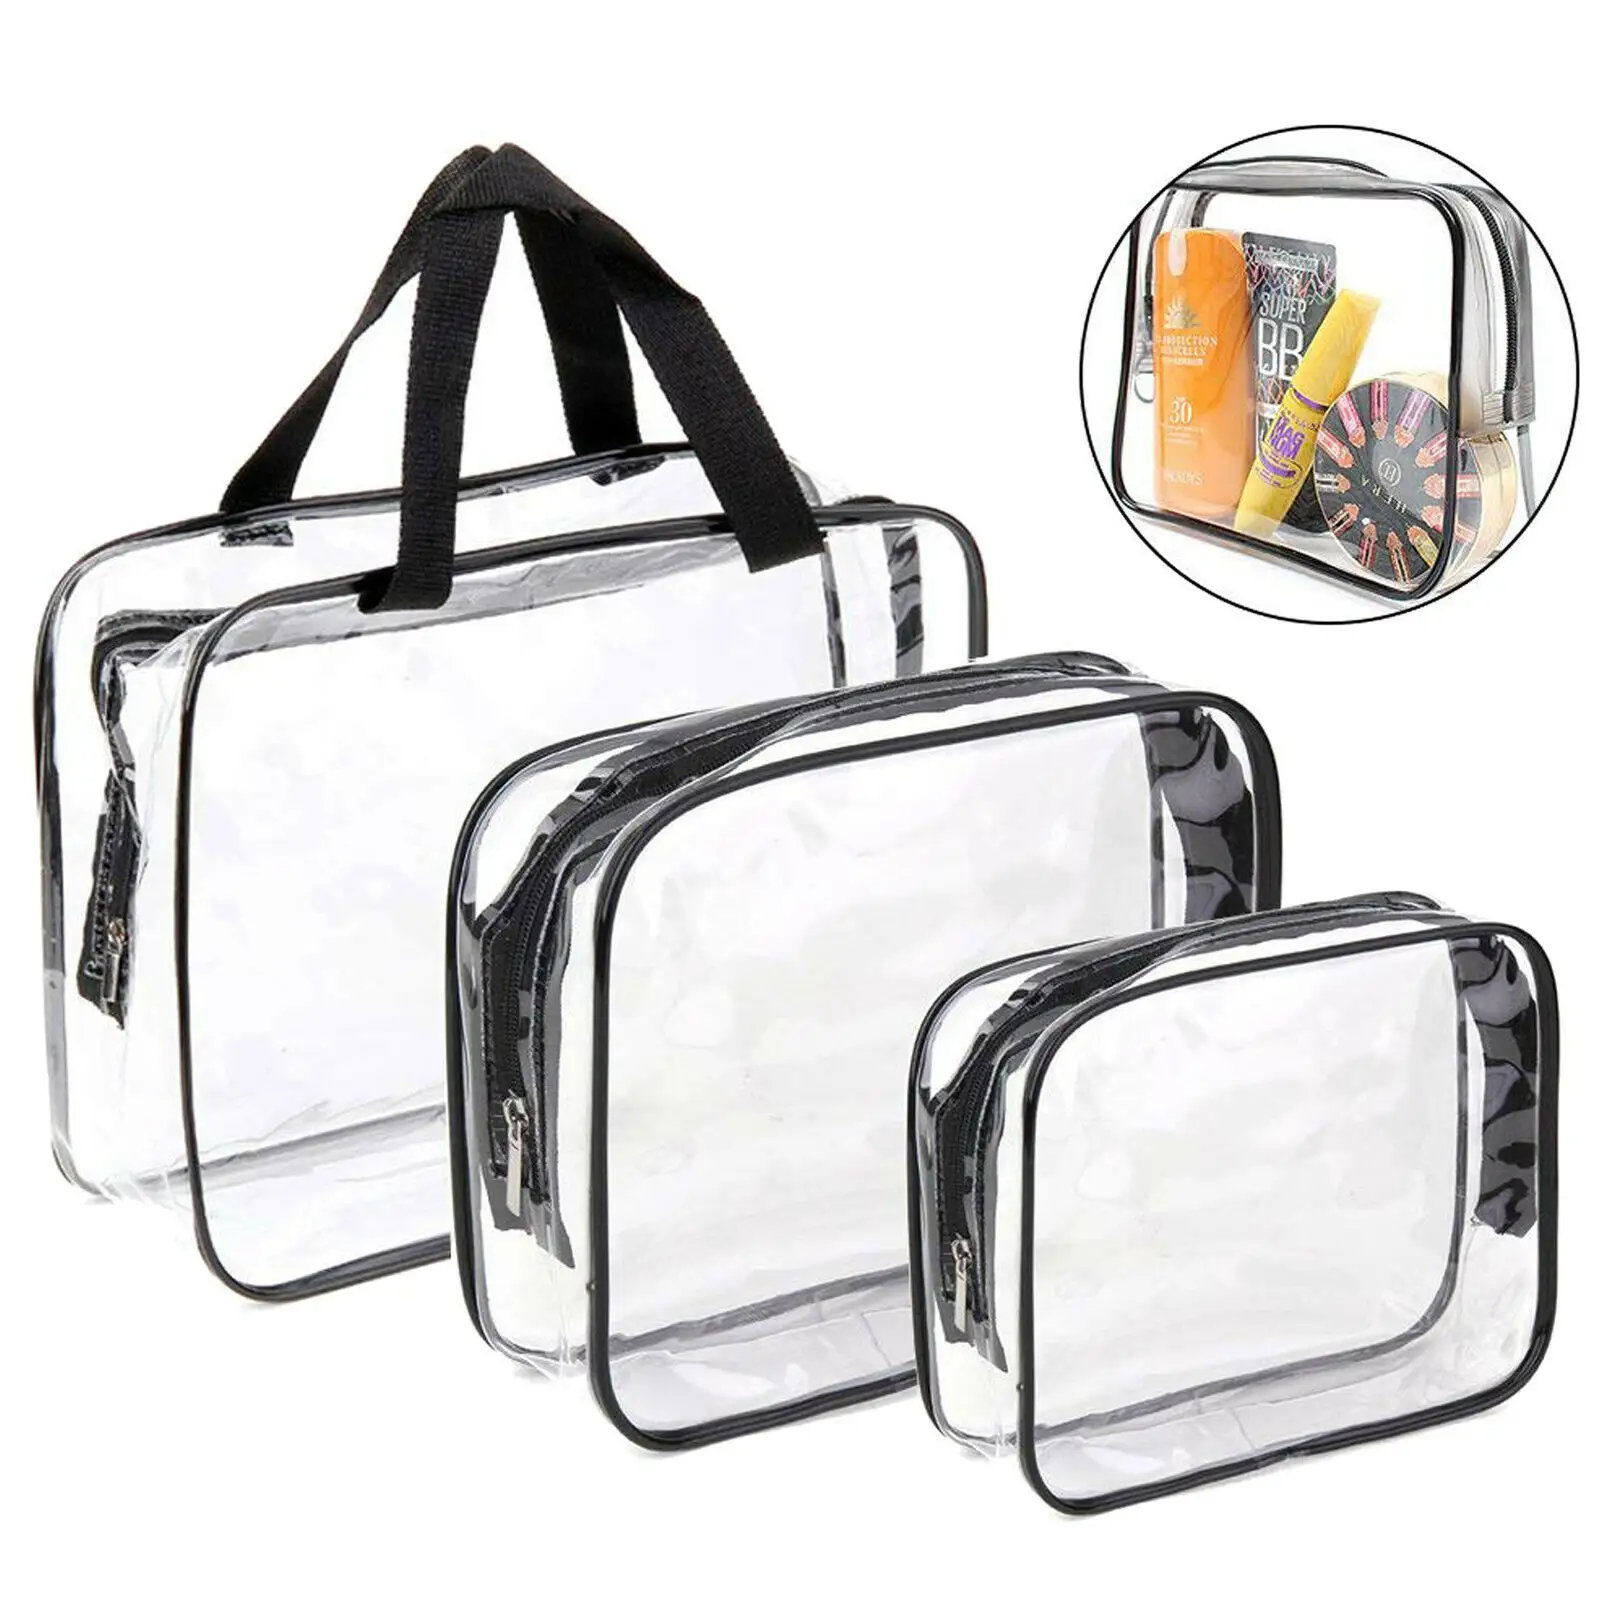 Toiletry Bags 3 in 1 Gift Makeup Bags Cases Plastic Bag for Men&Women, Dust-Free